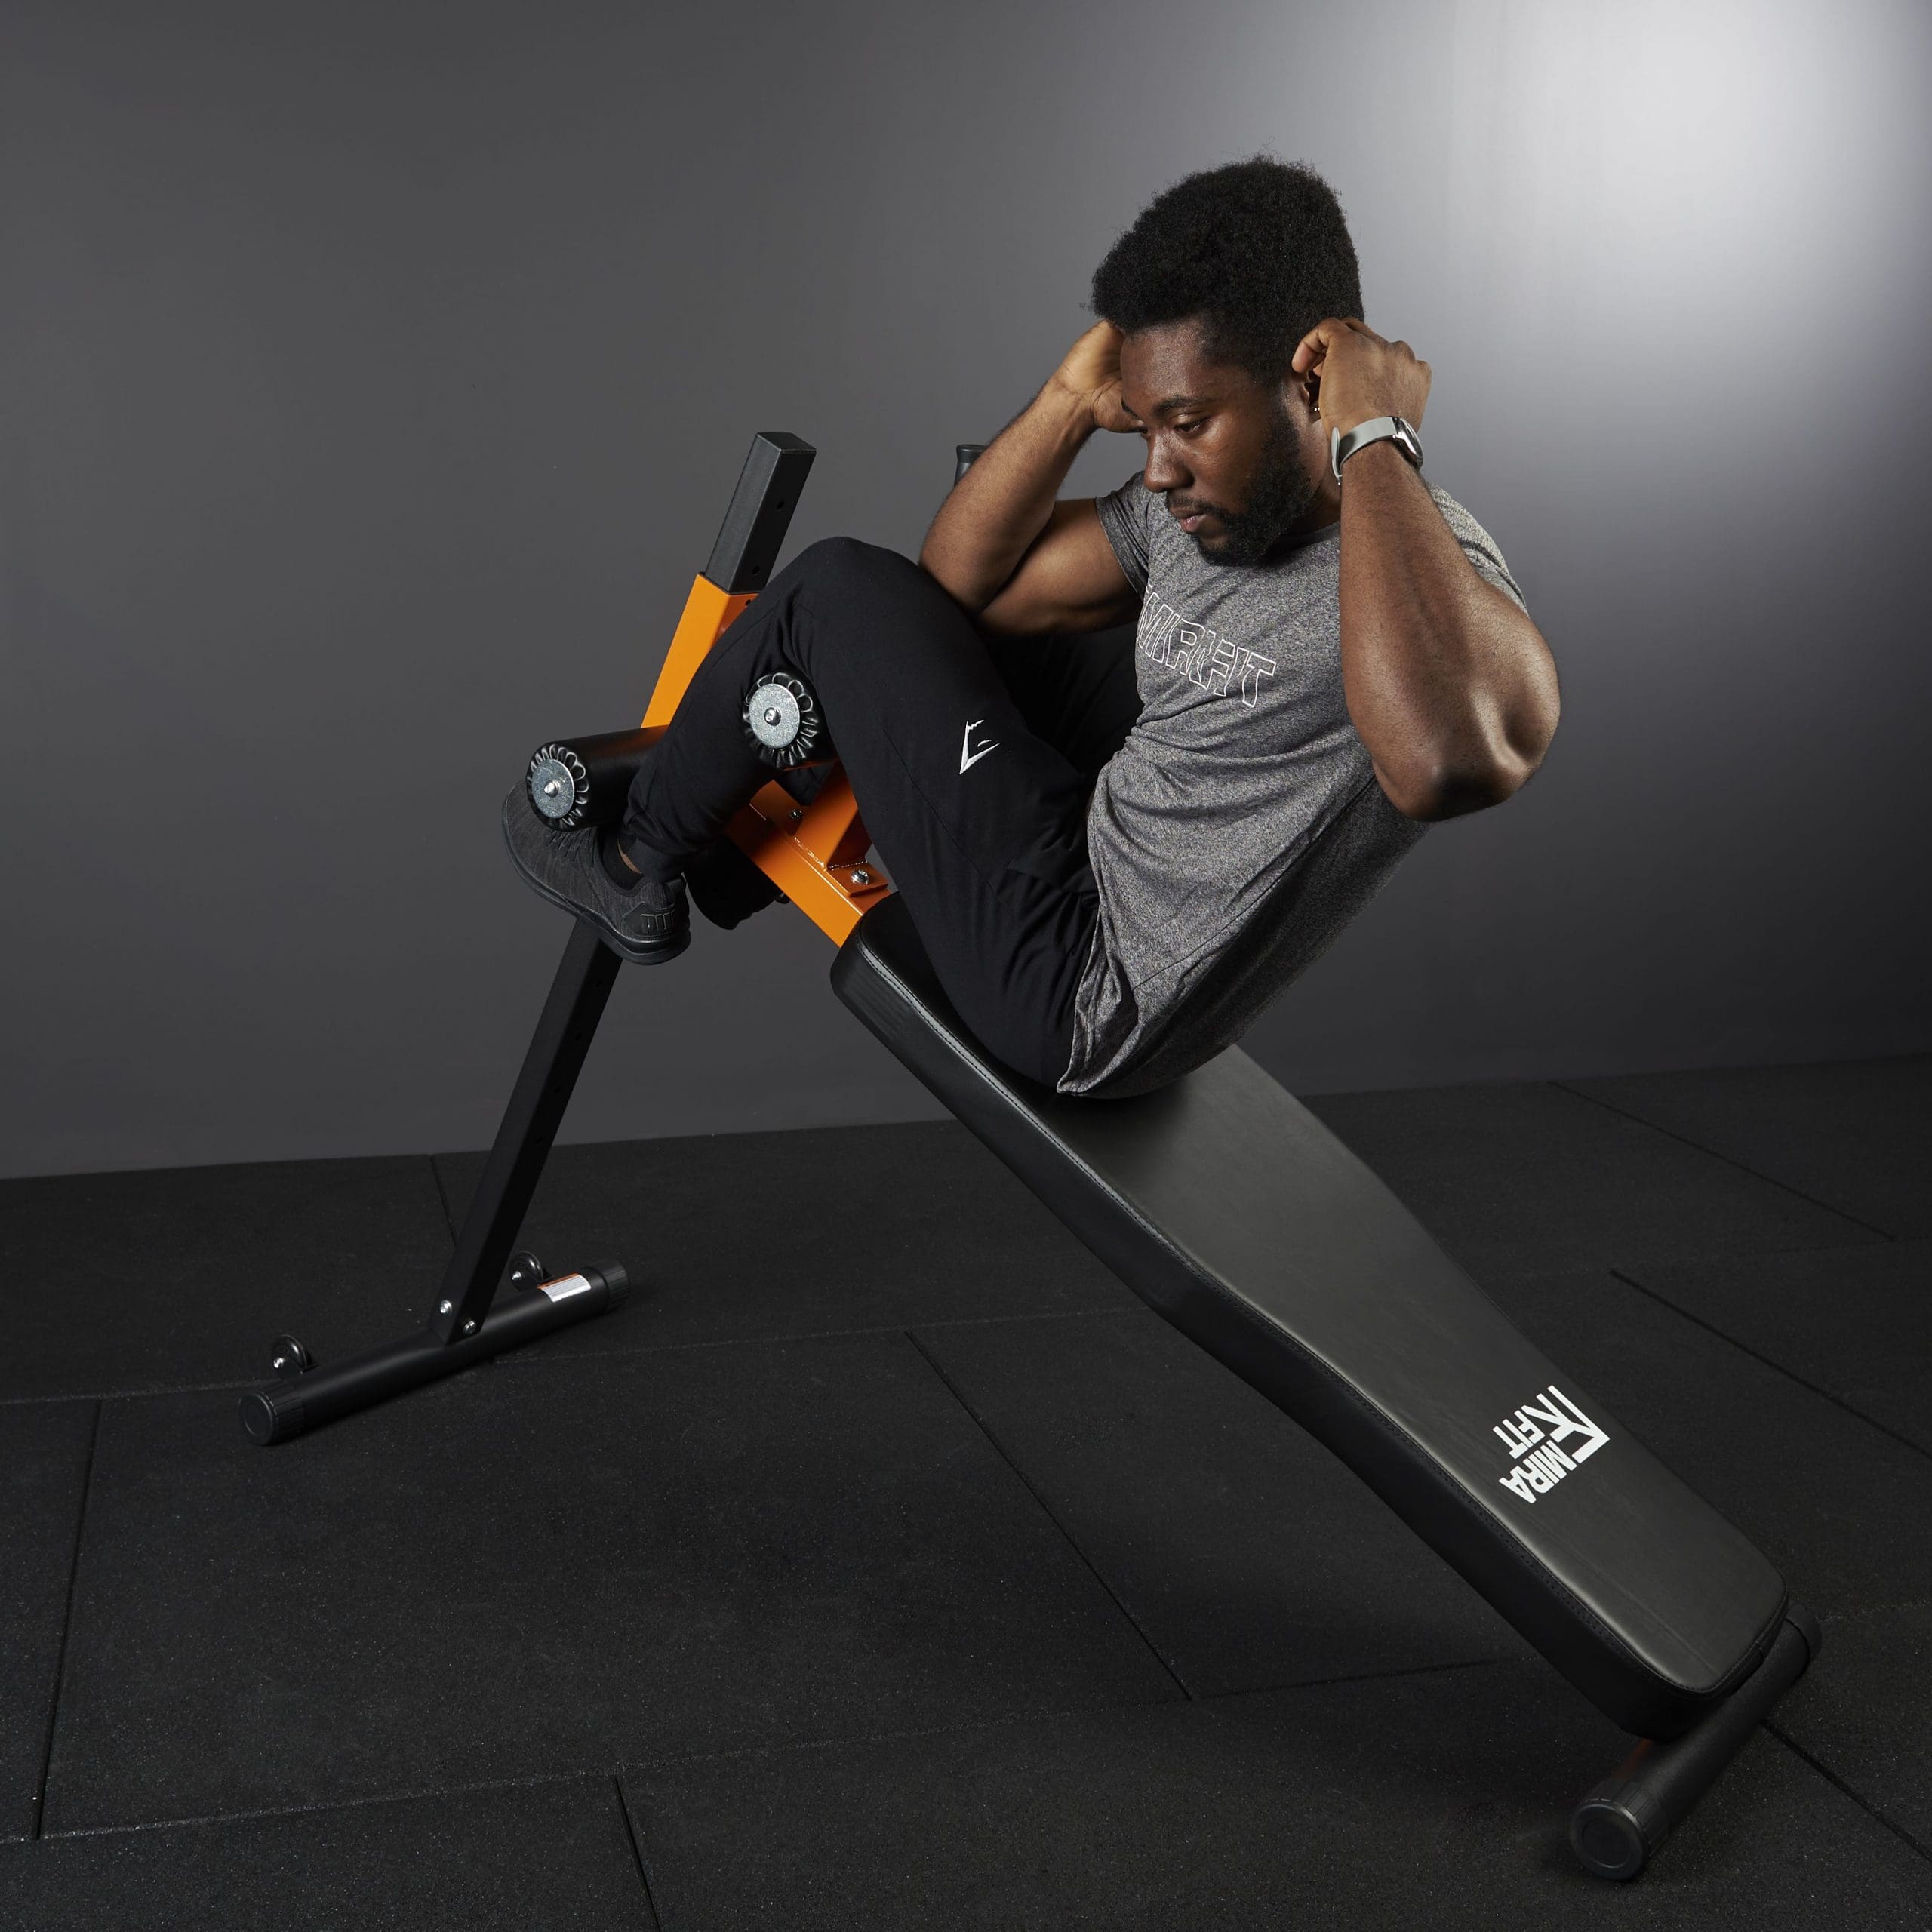 Mirafit Sit Up Bench Review